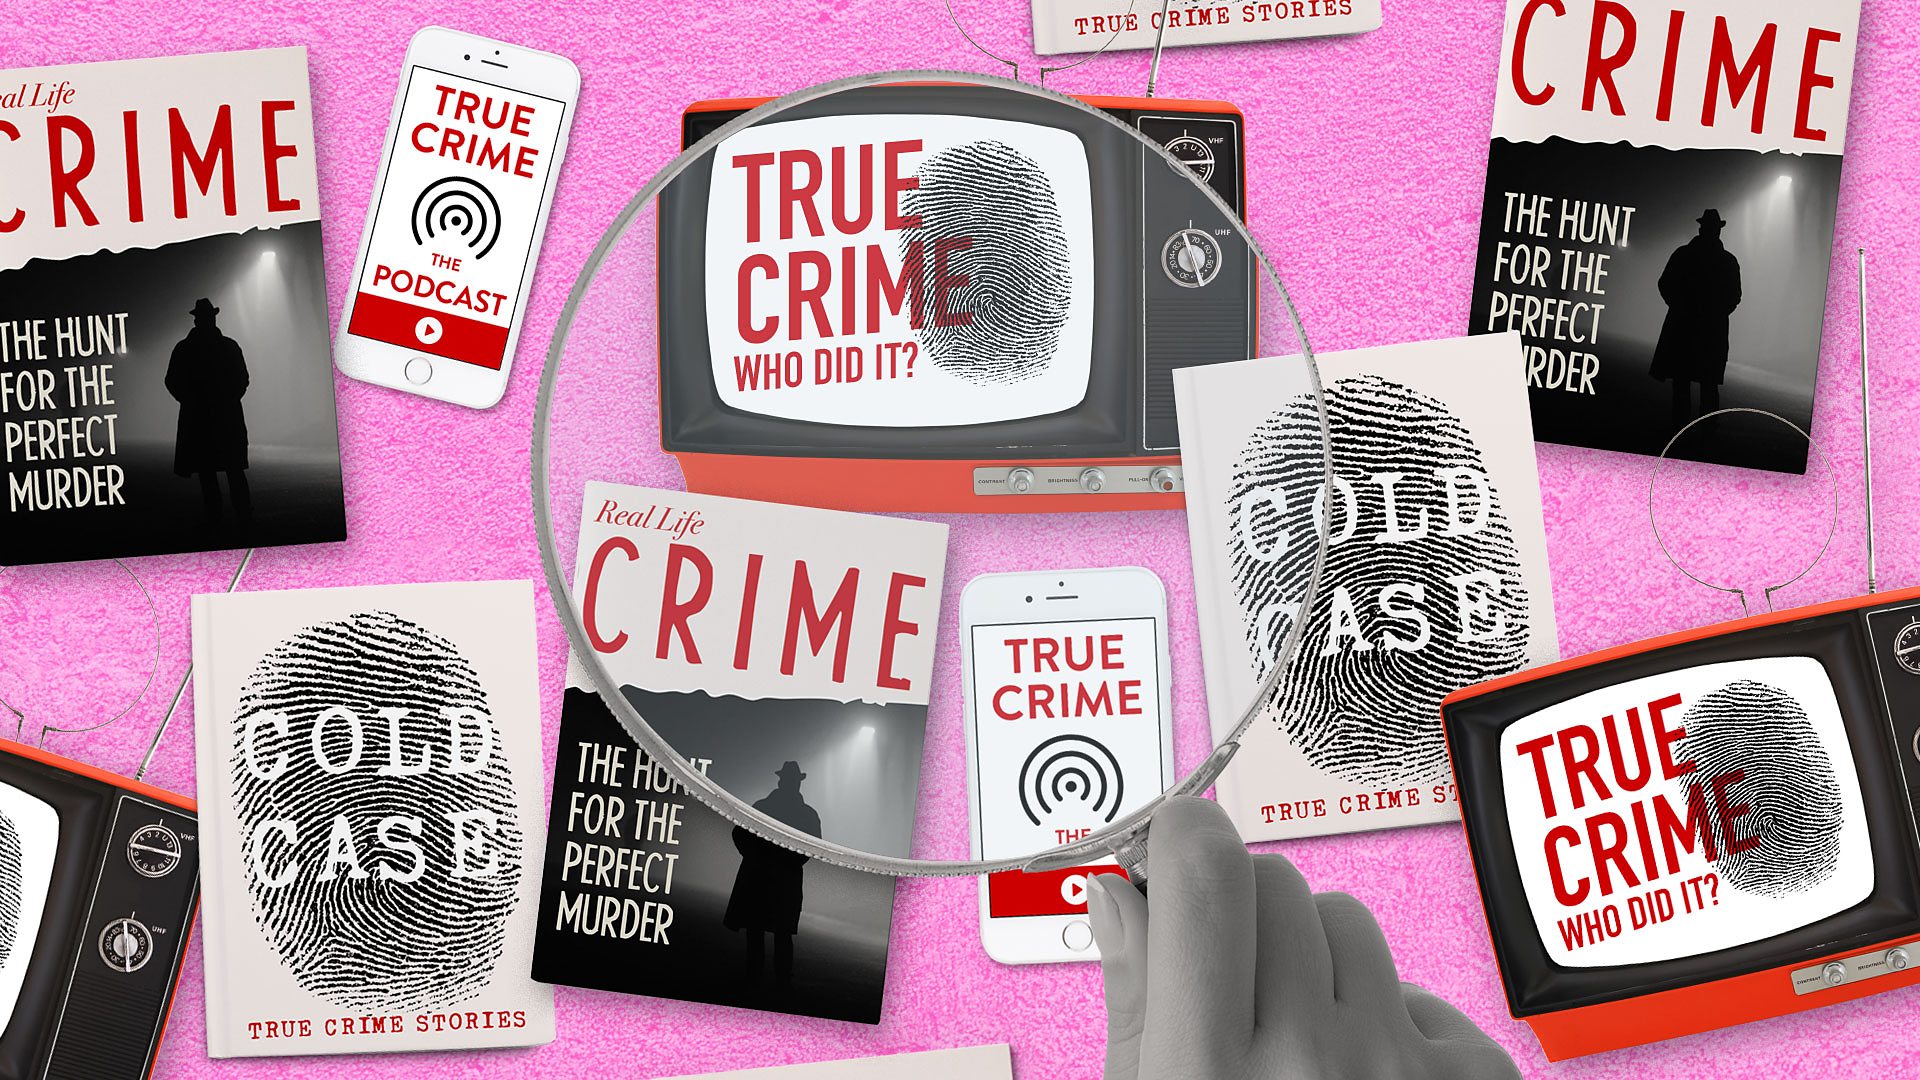 Unmask the deception behind your favorite earbud investigations as we unravel the shocking hoaxes within the mercurial realm of true crime podcasts. Just don't gasp too loudly.